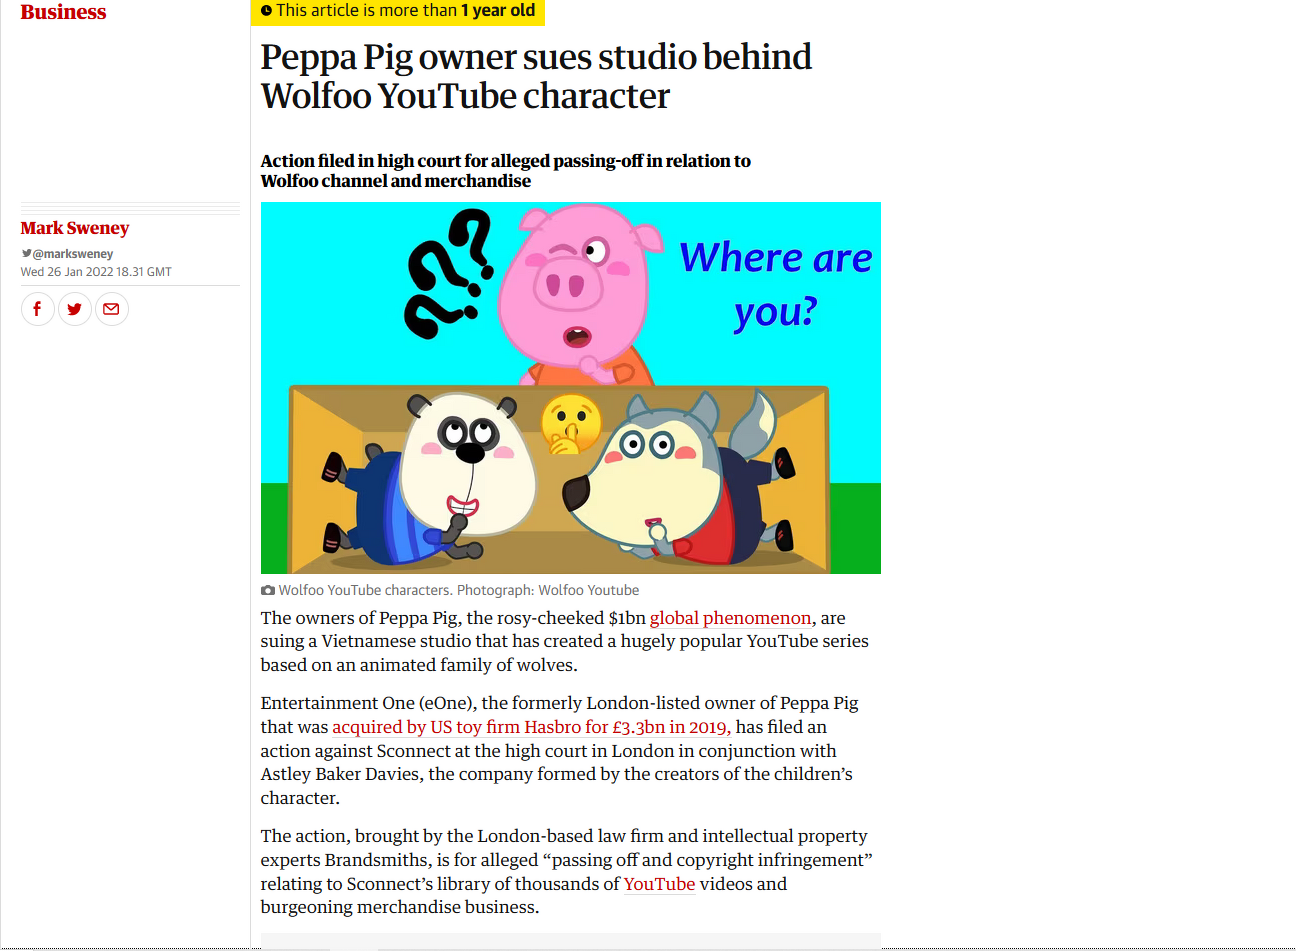 Lawsuits, Countersuits, And  Takedowns: The Copyright Battle Between  EOne's 'Peppa Pig' And Sconnect's 'Wolfoo